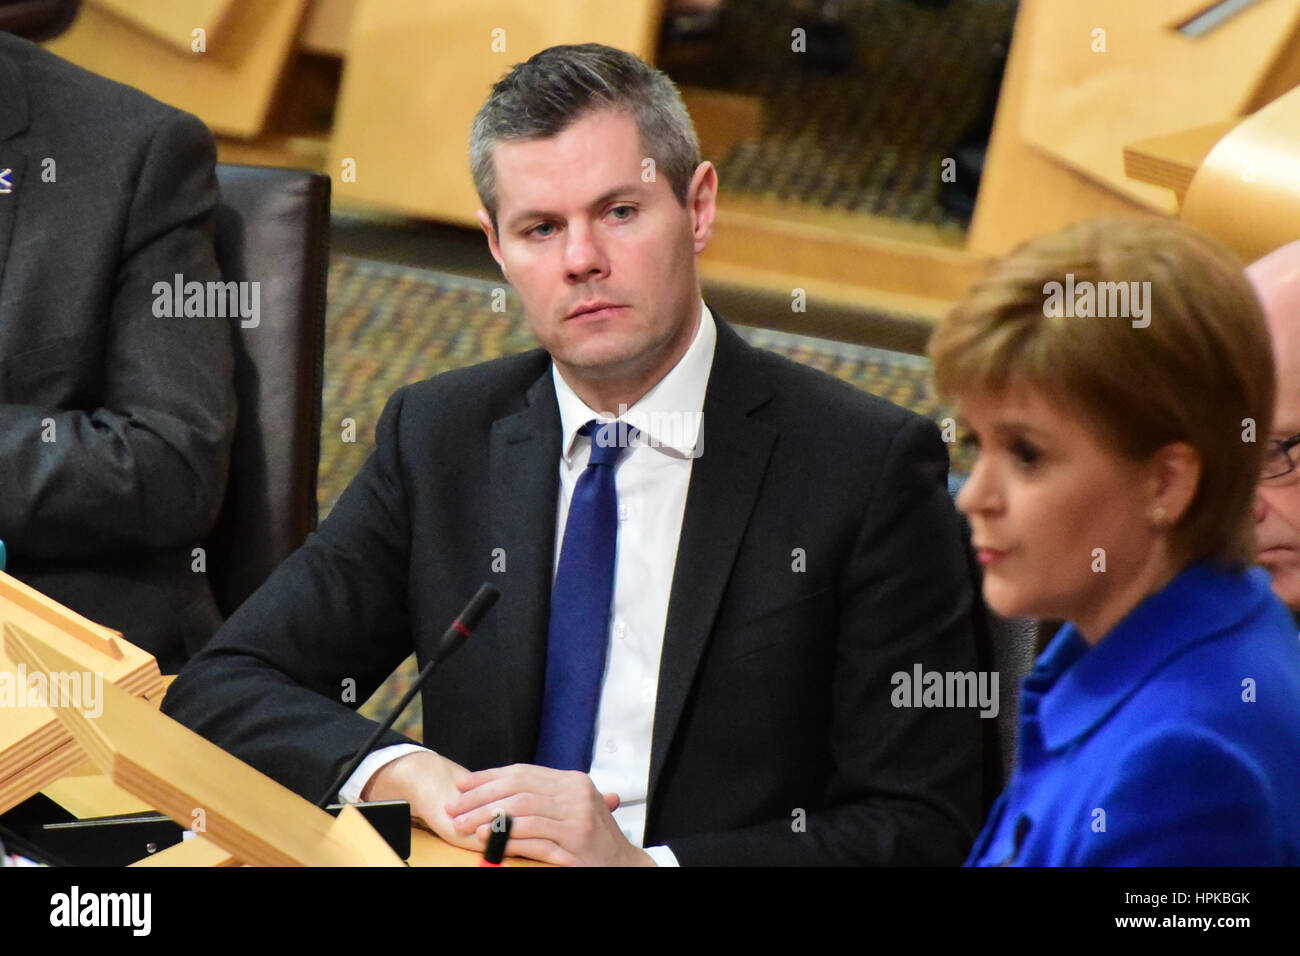 Edinburgh, Scotland, UK. 23rd February 2017. Finance Secretary Derek Mackay listens as Nicola Sturgeon speaks during First Minister's Questions in the Scottish Parliament, shortly before the Stage 3 (final reading) debate on the Scottish budget, Credit: Ken Jack/Alamy Live News Stock Photo